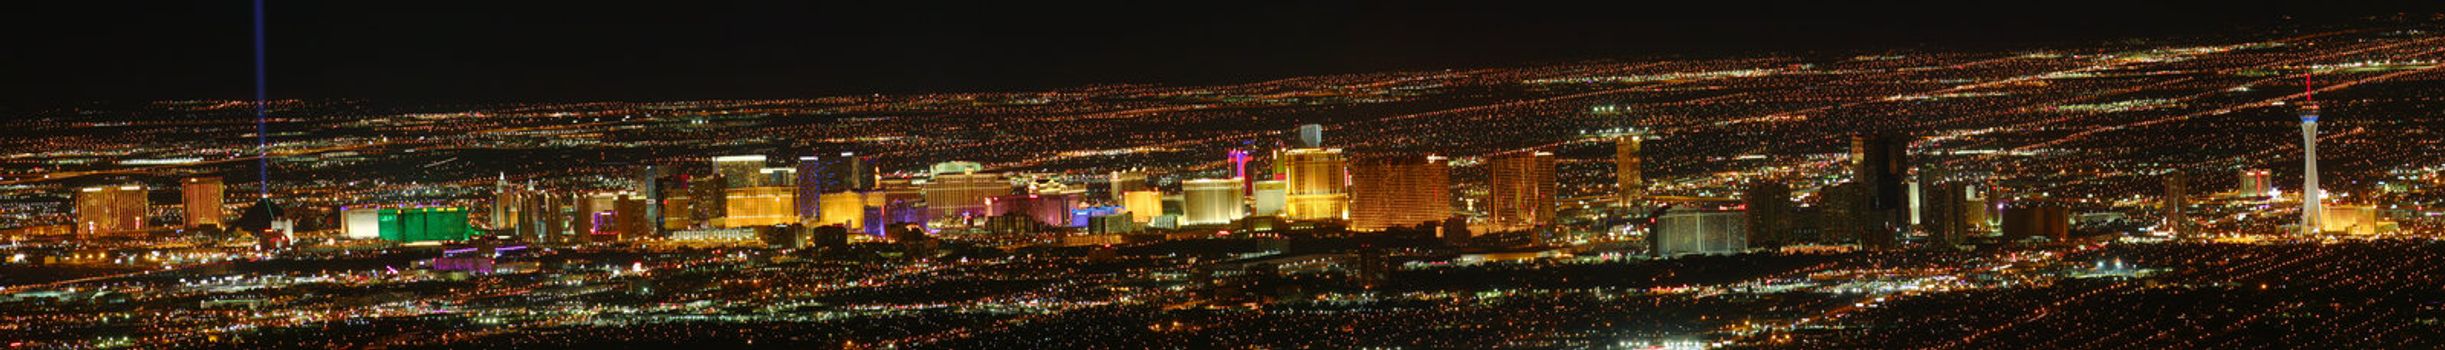 Las Vegas Strip panoramic view (high resolution) as seen from elevation east of Sin City.